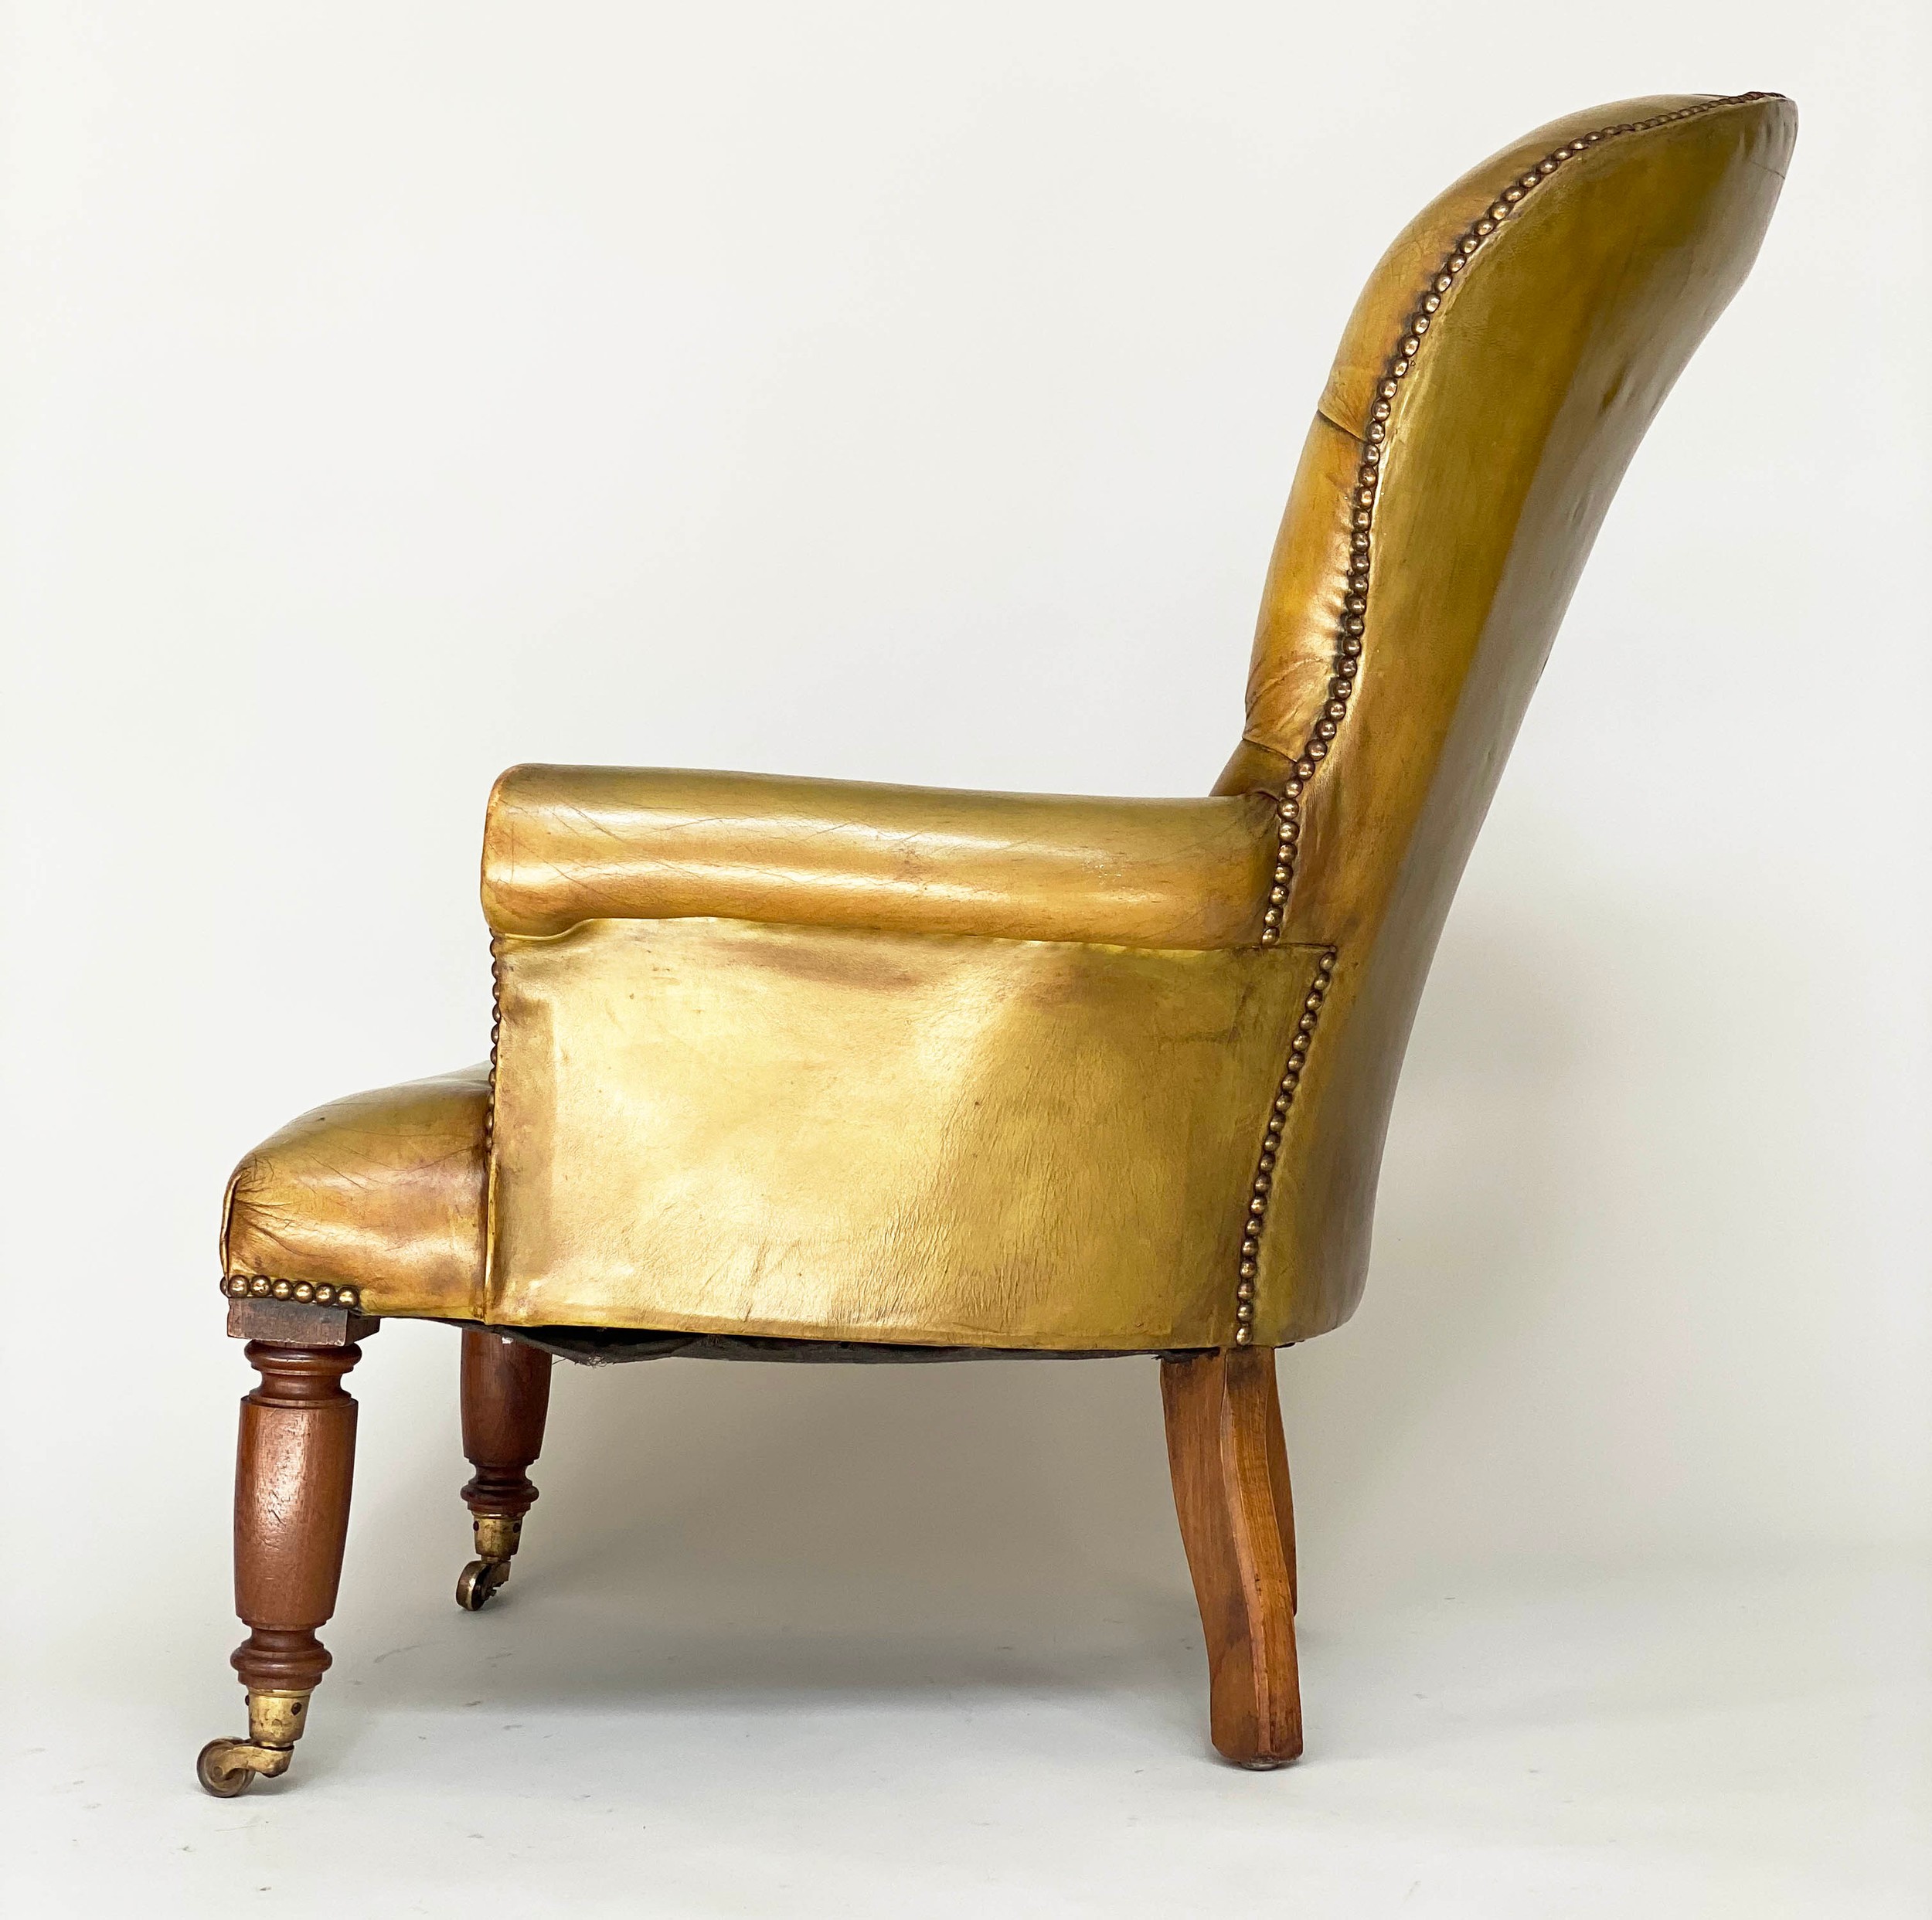 LIBRARY ARMCHAIR, Edwardian mahogany with brass studded and deep buttoned green leather upholstery - Image 4 of 10